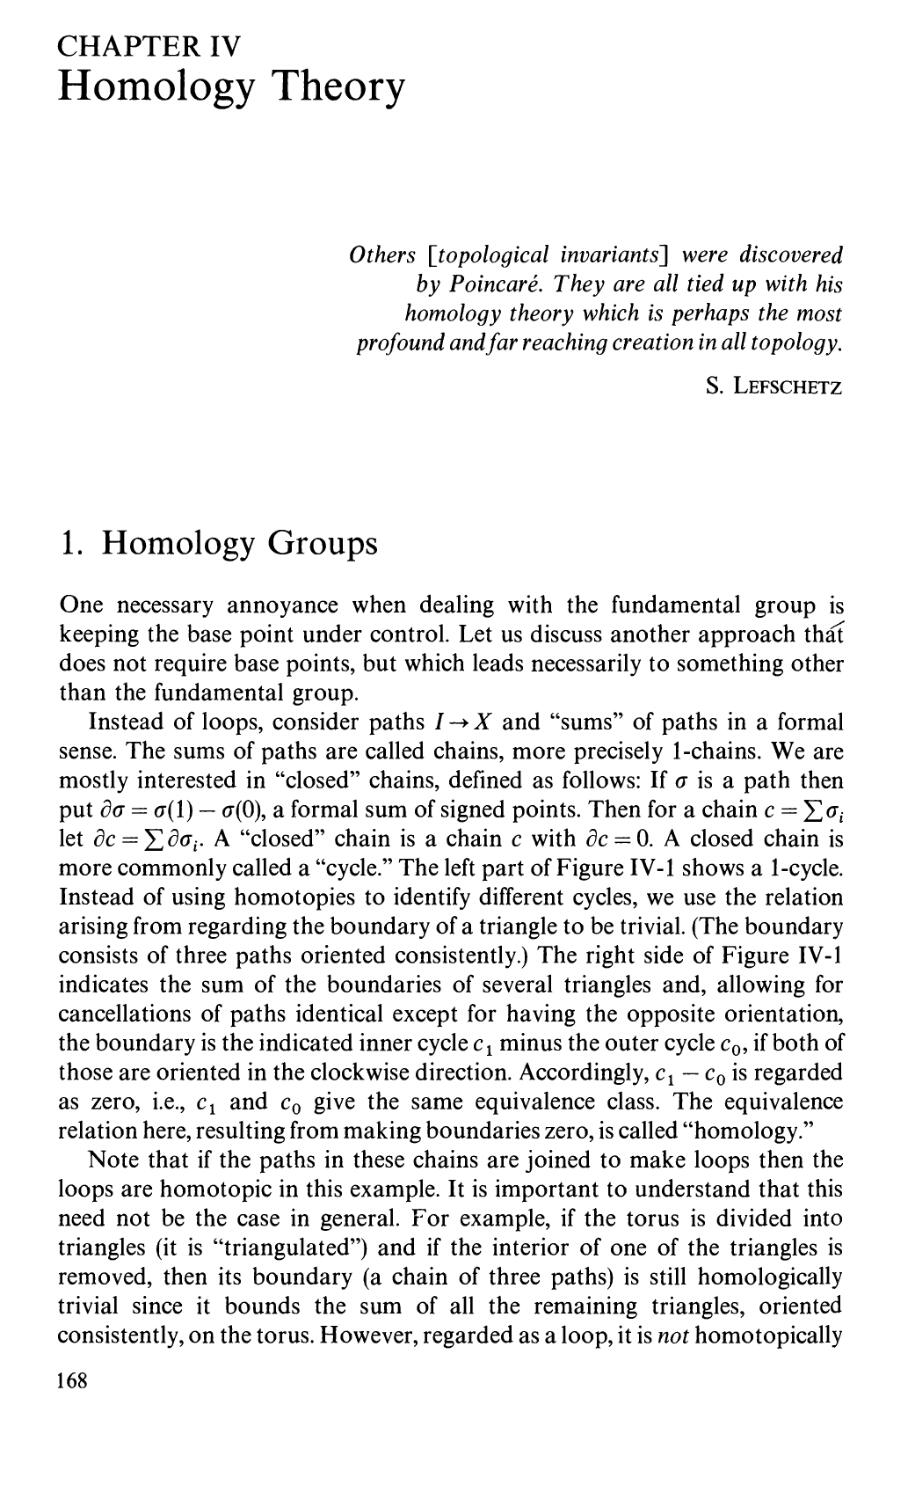 Chapter IV. Homology Theory